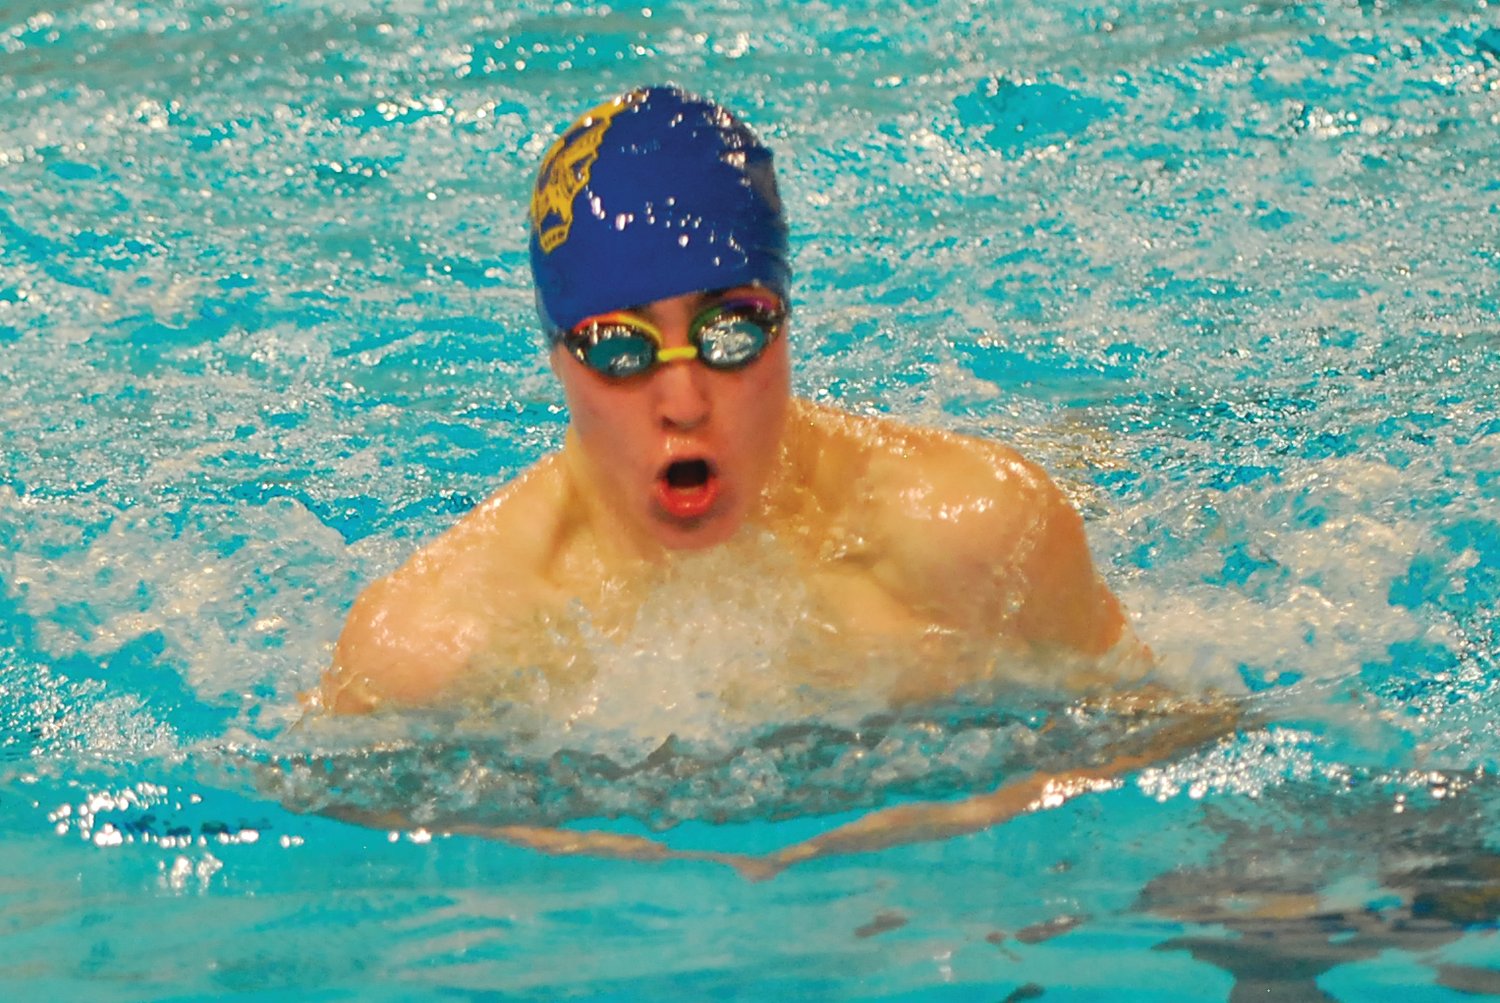 Crawfordsville's Marshall Horton swims to a win in the 100 breaststroke.